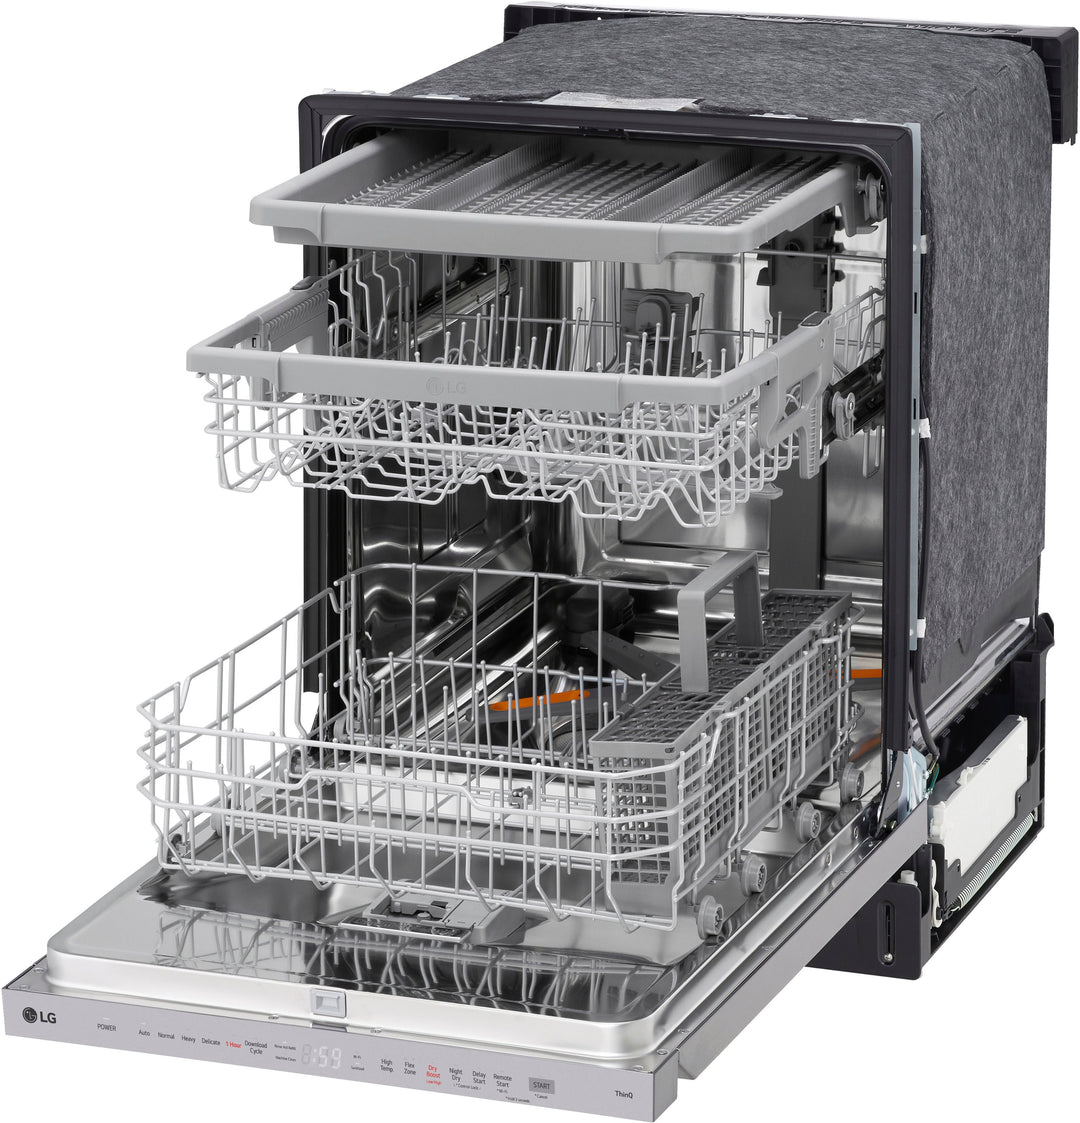 LG - Top Control Smart Built-in Stainless Steel Tub Dishwasher with 3rd Rack, QuadWash Pro and 46dBA - Stainless Steel_5